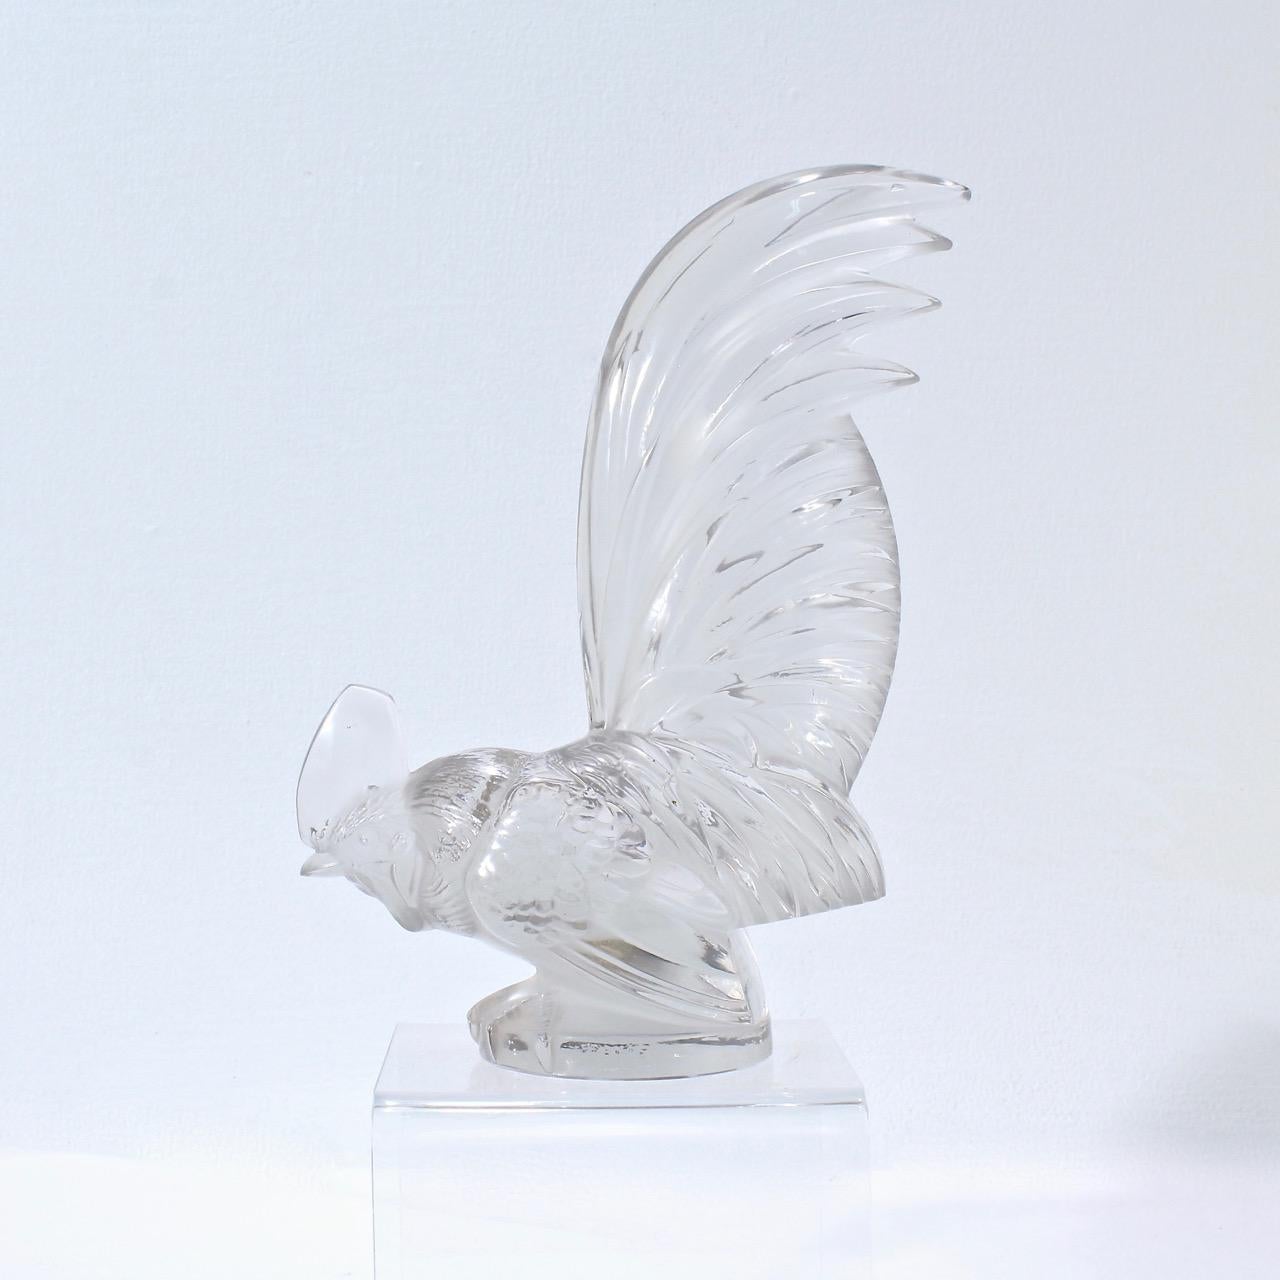 Coq Nain.

The iconic car mascot of a cockerel or rooster from the quintessential French Art Deco glass house - Lalique. The cockerel was first introduced in 1928 and is amongst the most popular of the car mascots ever produced. 

This model is